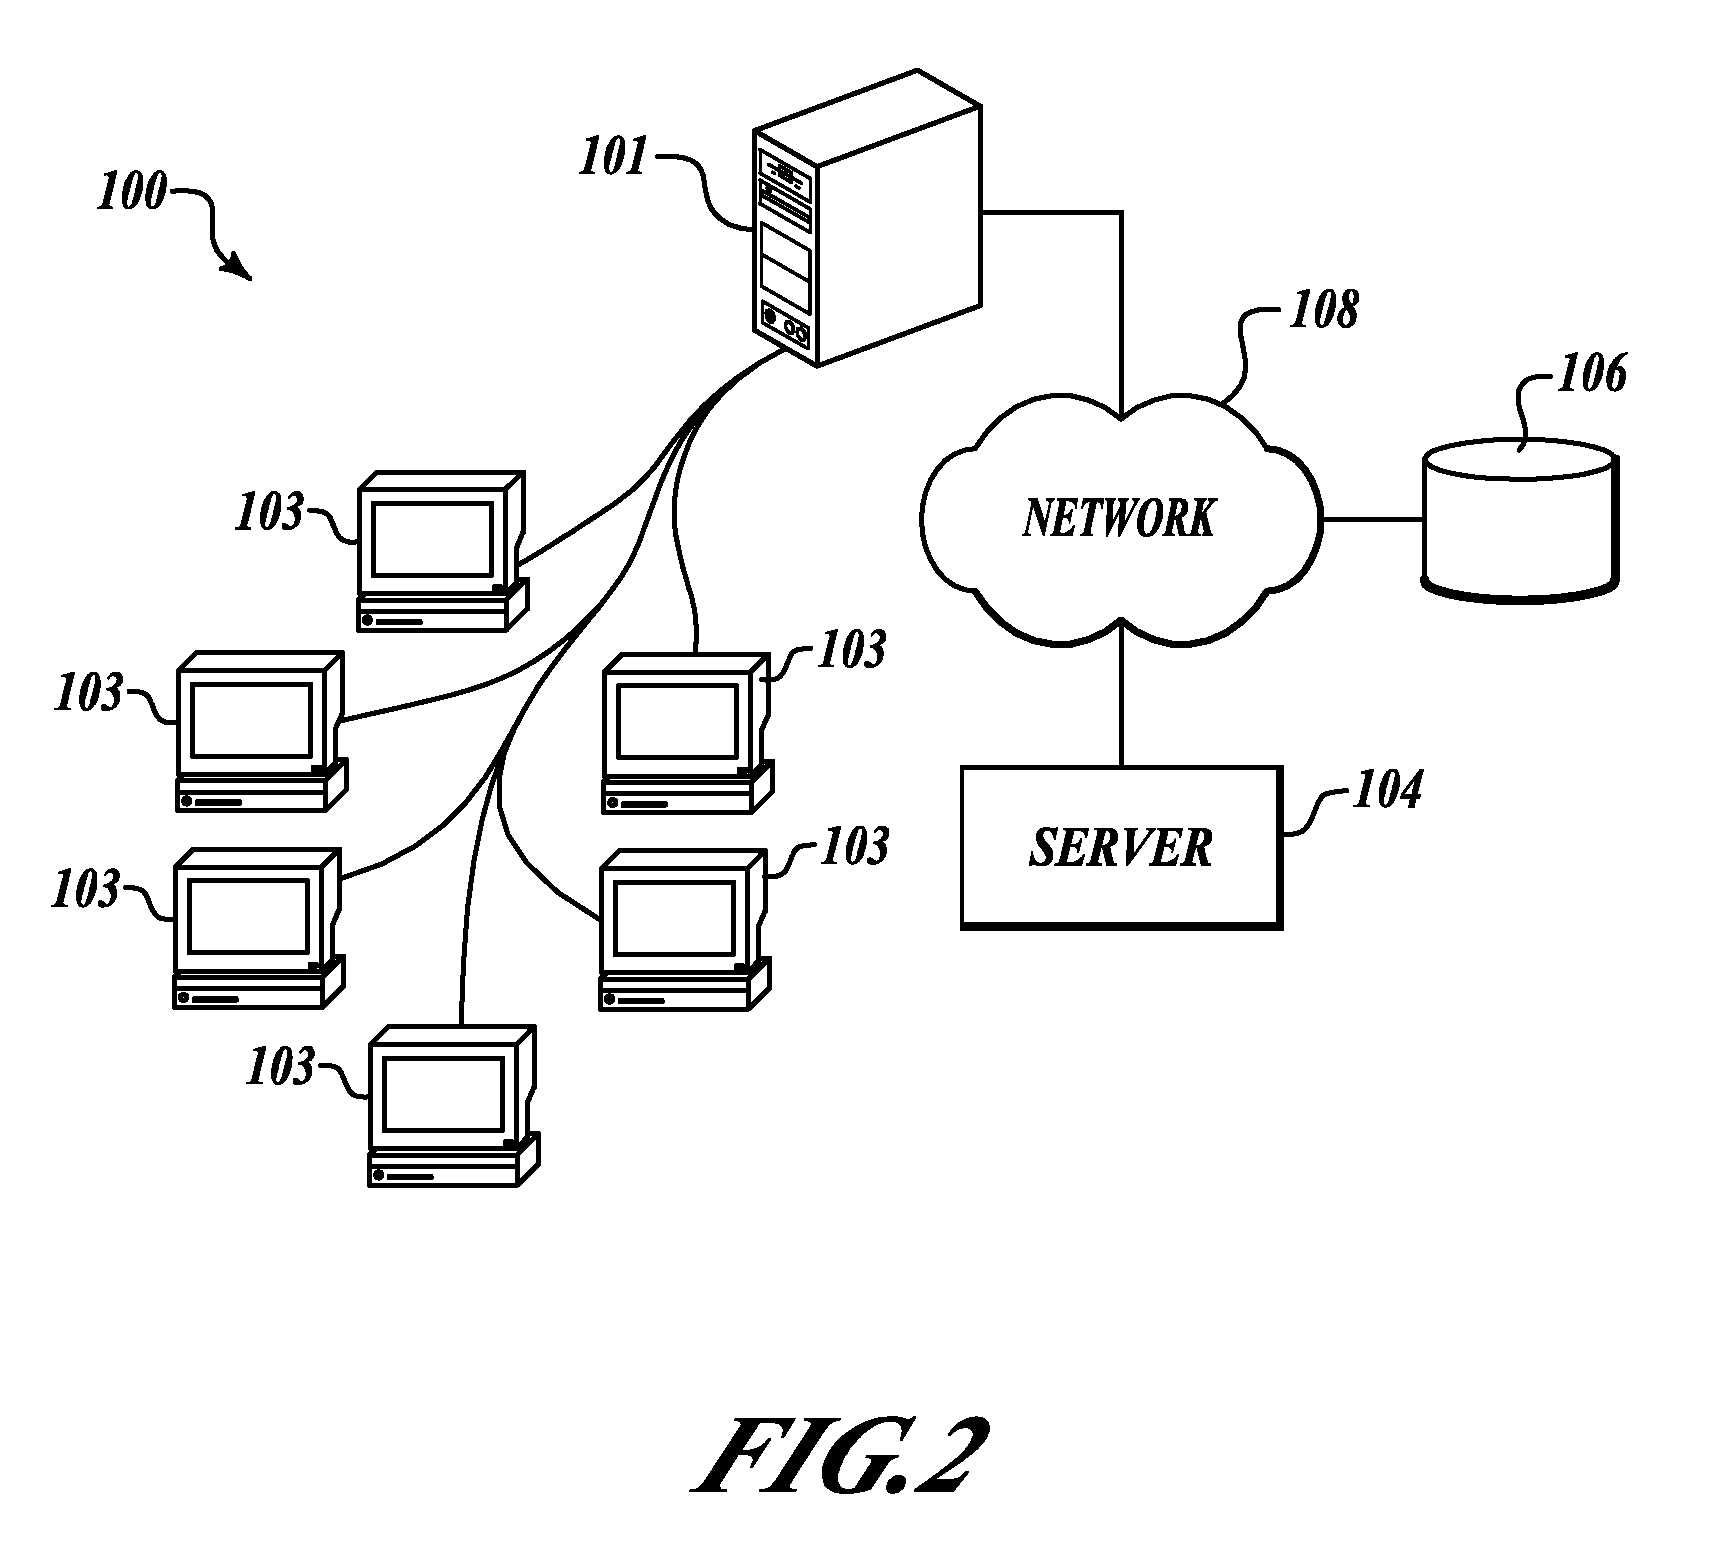 Methods and systems for data analysis and feature recognition